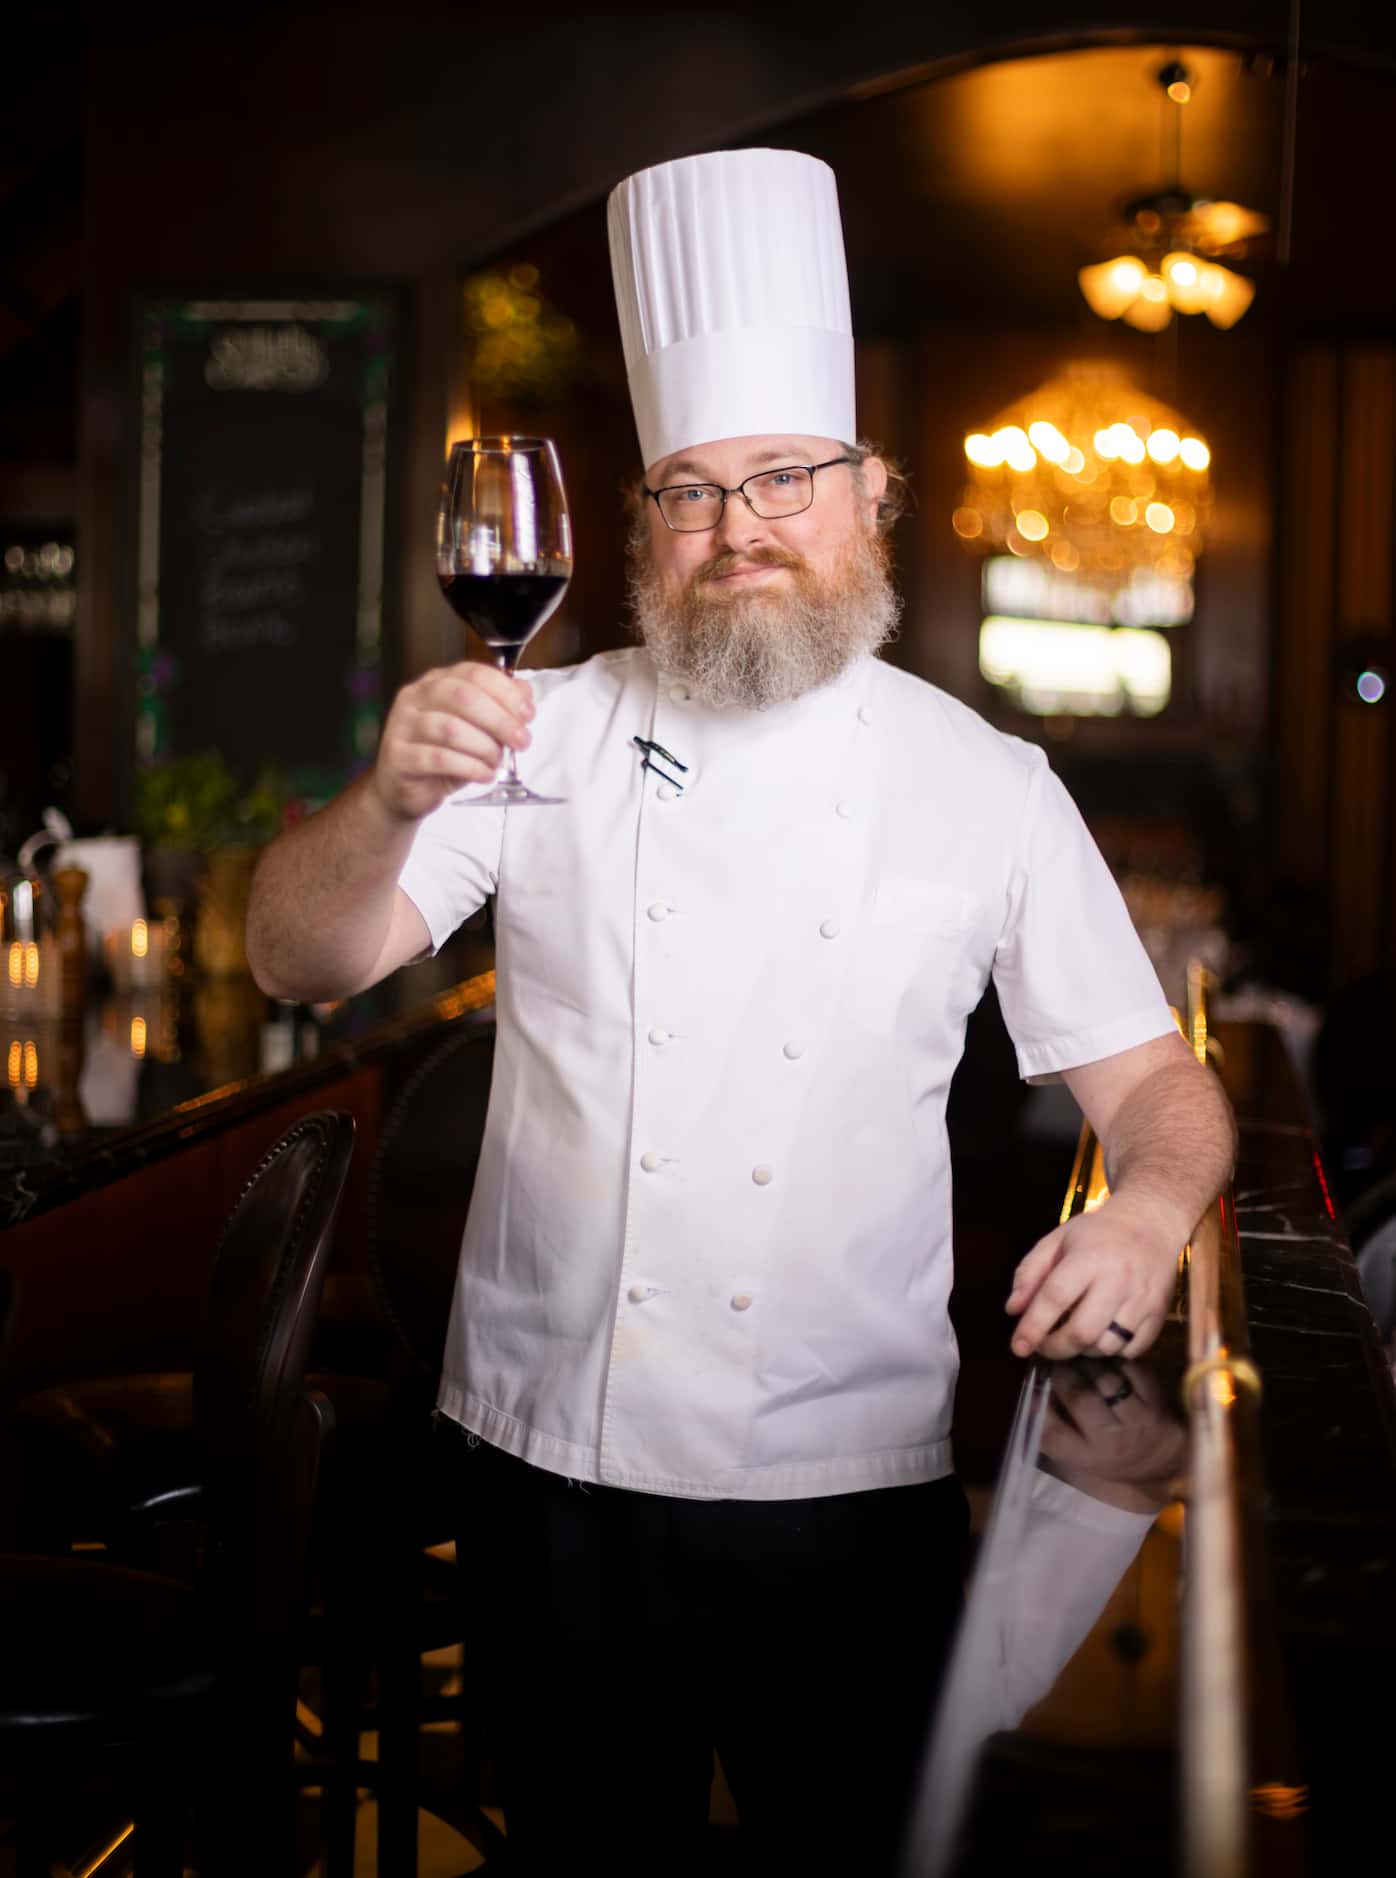 Executive chef Bobby M. Weddle is running the kitchen at St. Martin's Wine Bistro in Dallas.